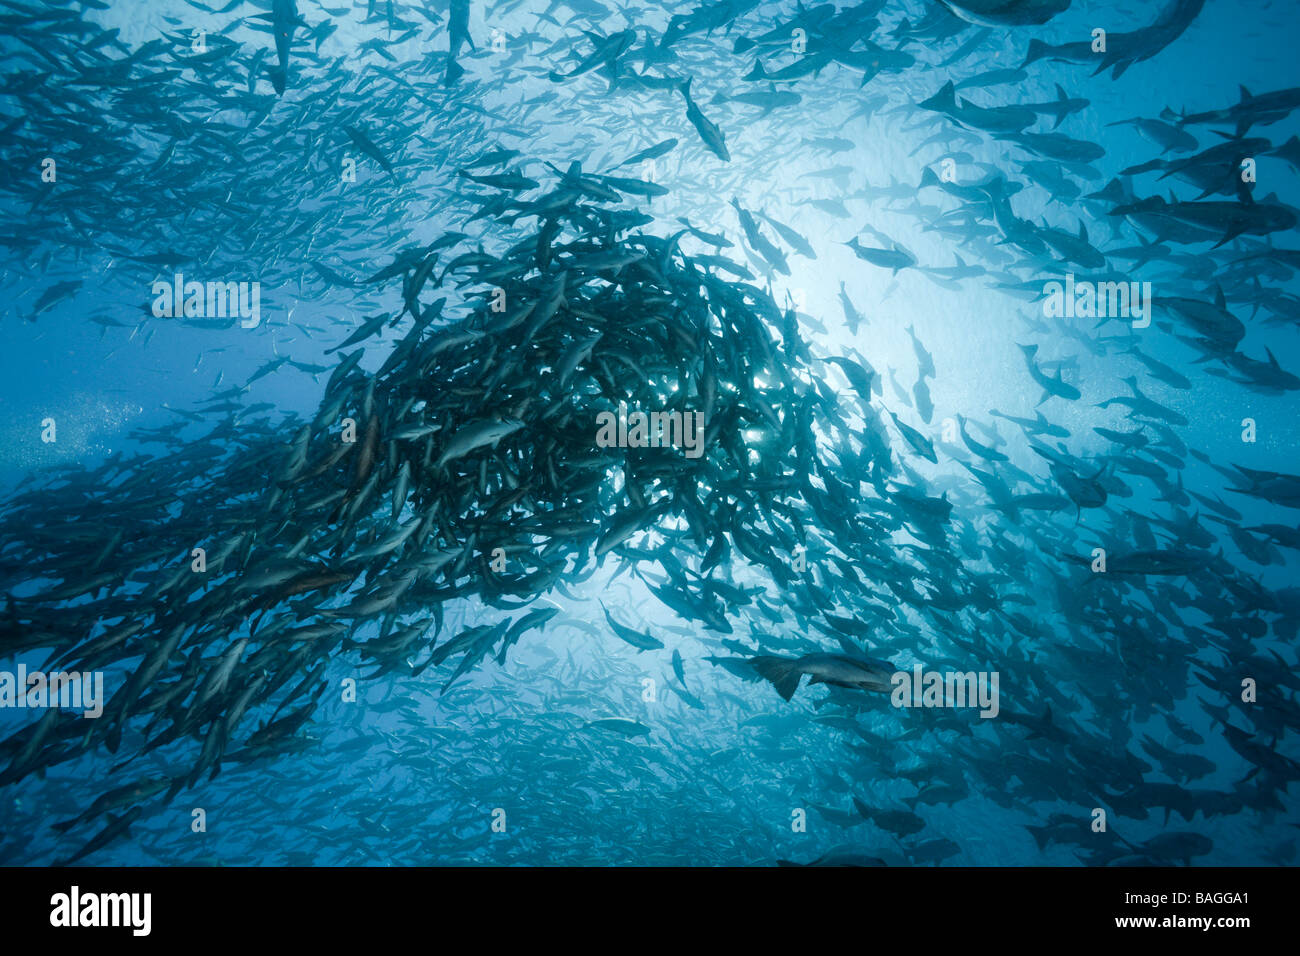 Shoal of Rudderfish laying Eggs in Open Water Kyphosus cinerascens German Channel Micronesia Palau Stock Photo